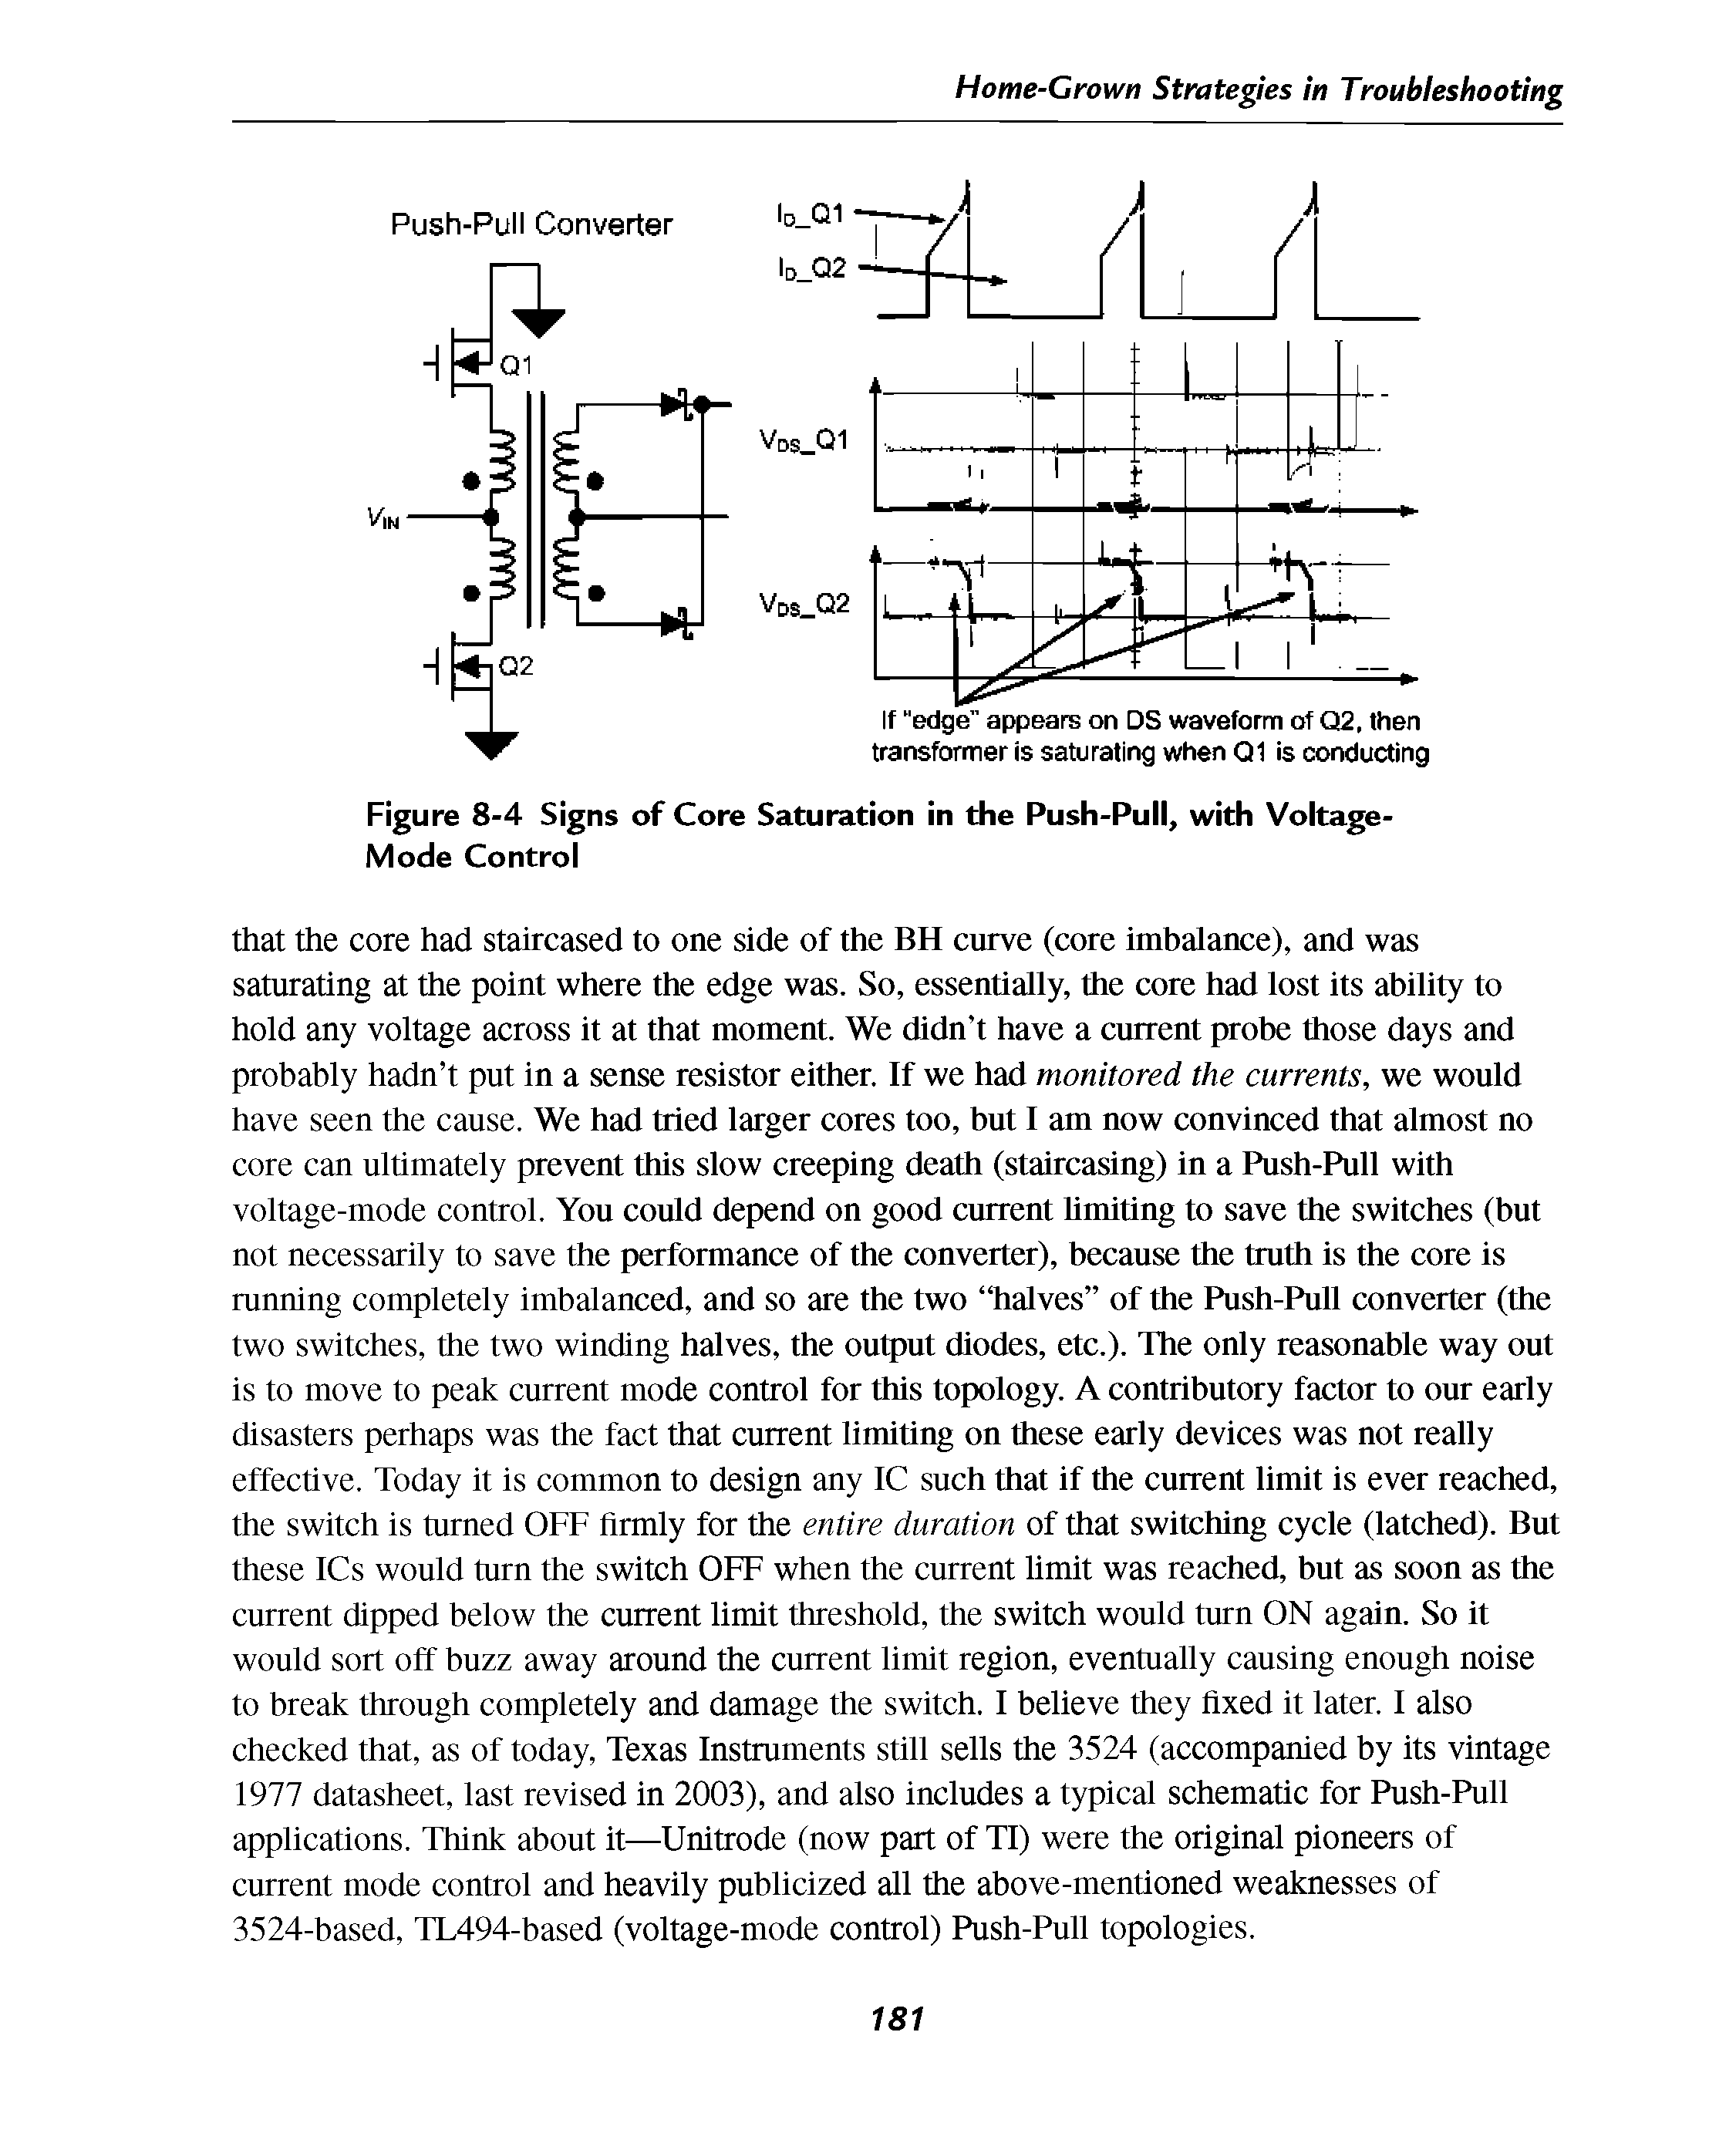 Figure 8-4 Signs of Core Saturation in the Push-Pull, with Voltage-Mode Control...